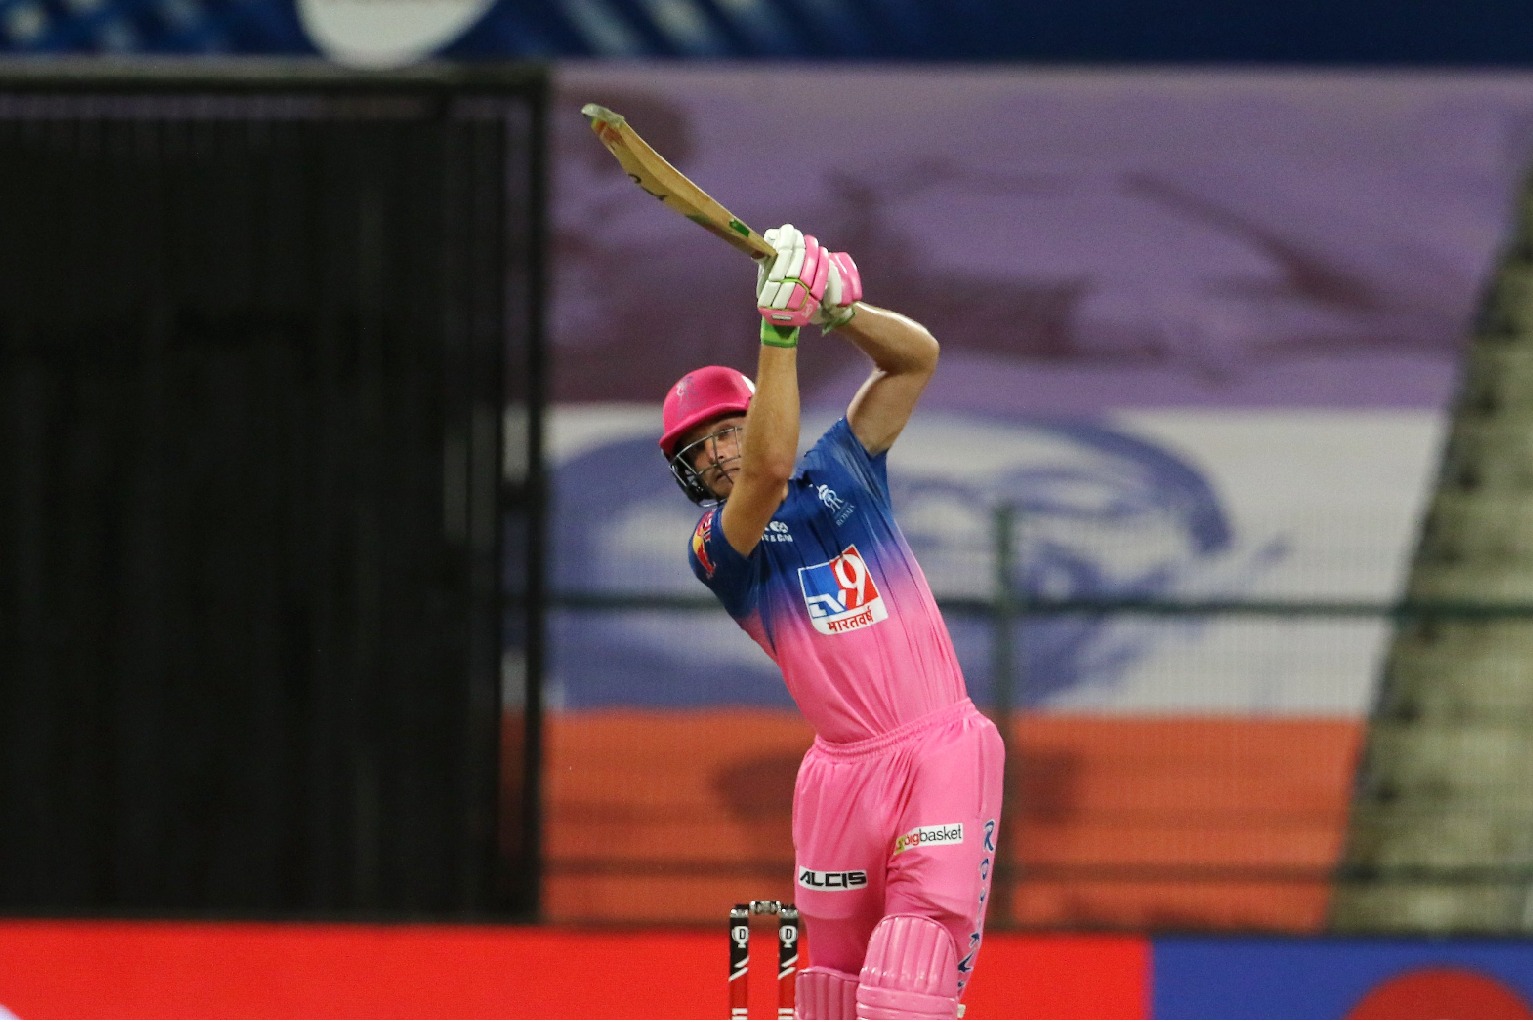 Chennai super kings defeated by Rajasthan royals